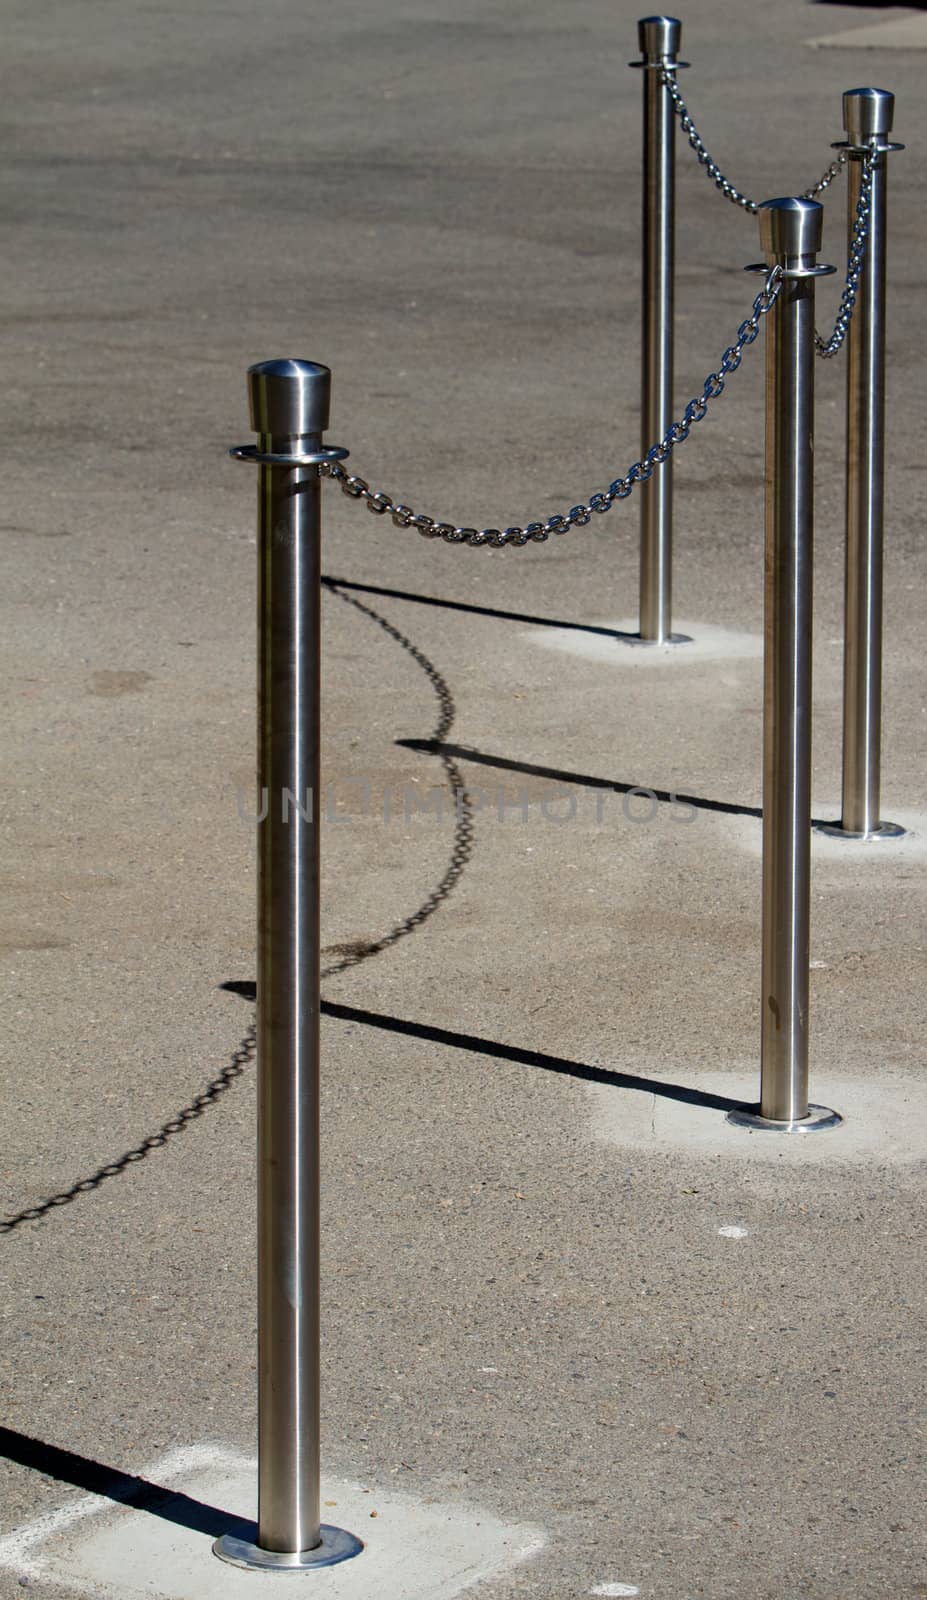 Stainless steel cue chain and posts on concrete